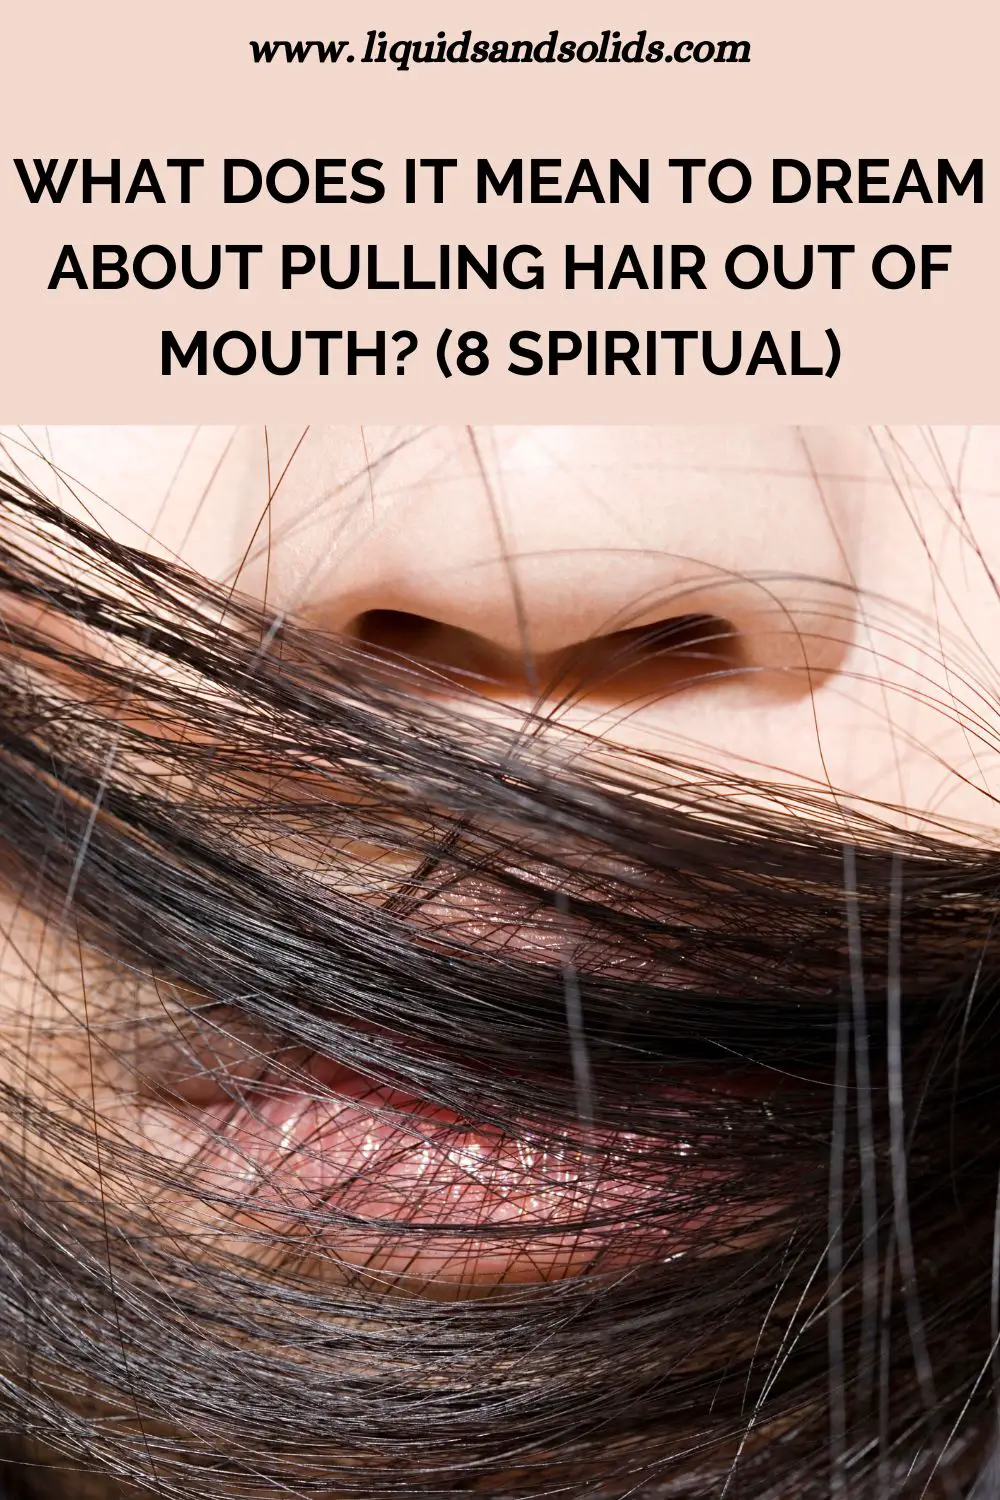 Dream Of Hair In Mouth: What Does It Mean?